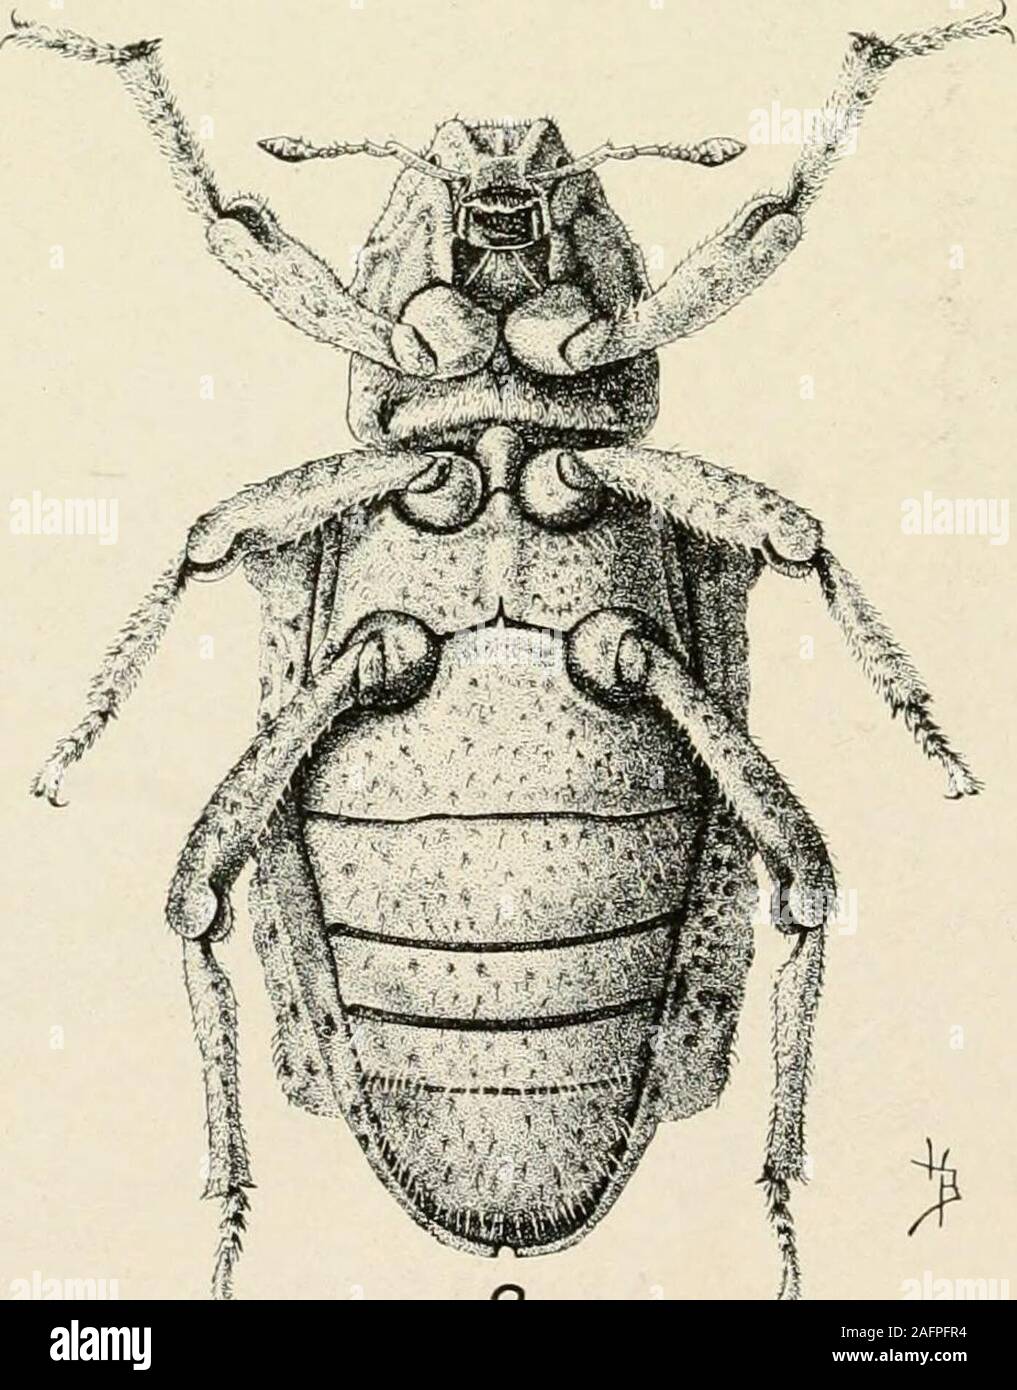 . A manual of dangerous insects likely to be introduced in the United States through importations. k&gt; 2 Potato Weevil. Rhigopsidius tucumanus Heller. (Pierce.) INSECTS OF PLUM AND CHERRY, 177 Cryptophaga unipunctata Donovan.(The Cherry Borer. Xyloryctidge; Lepidoptera.) Hosts: Cherry, peach, honeysuckle. Injury: Very serious. Makes shallow tunnels in branches of trees. Description and biology: Adult, wing expanse 37 mm.; a white satiny moth; frontof head, antennae, and a dot on forewings, black. Larva, length, 50 mm.; pinkishwhite, hairy; covers entrance to burrow with silken web in which c Stock Photo